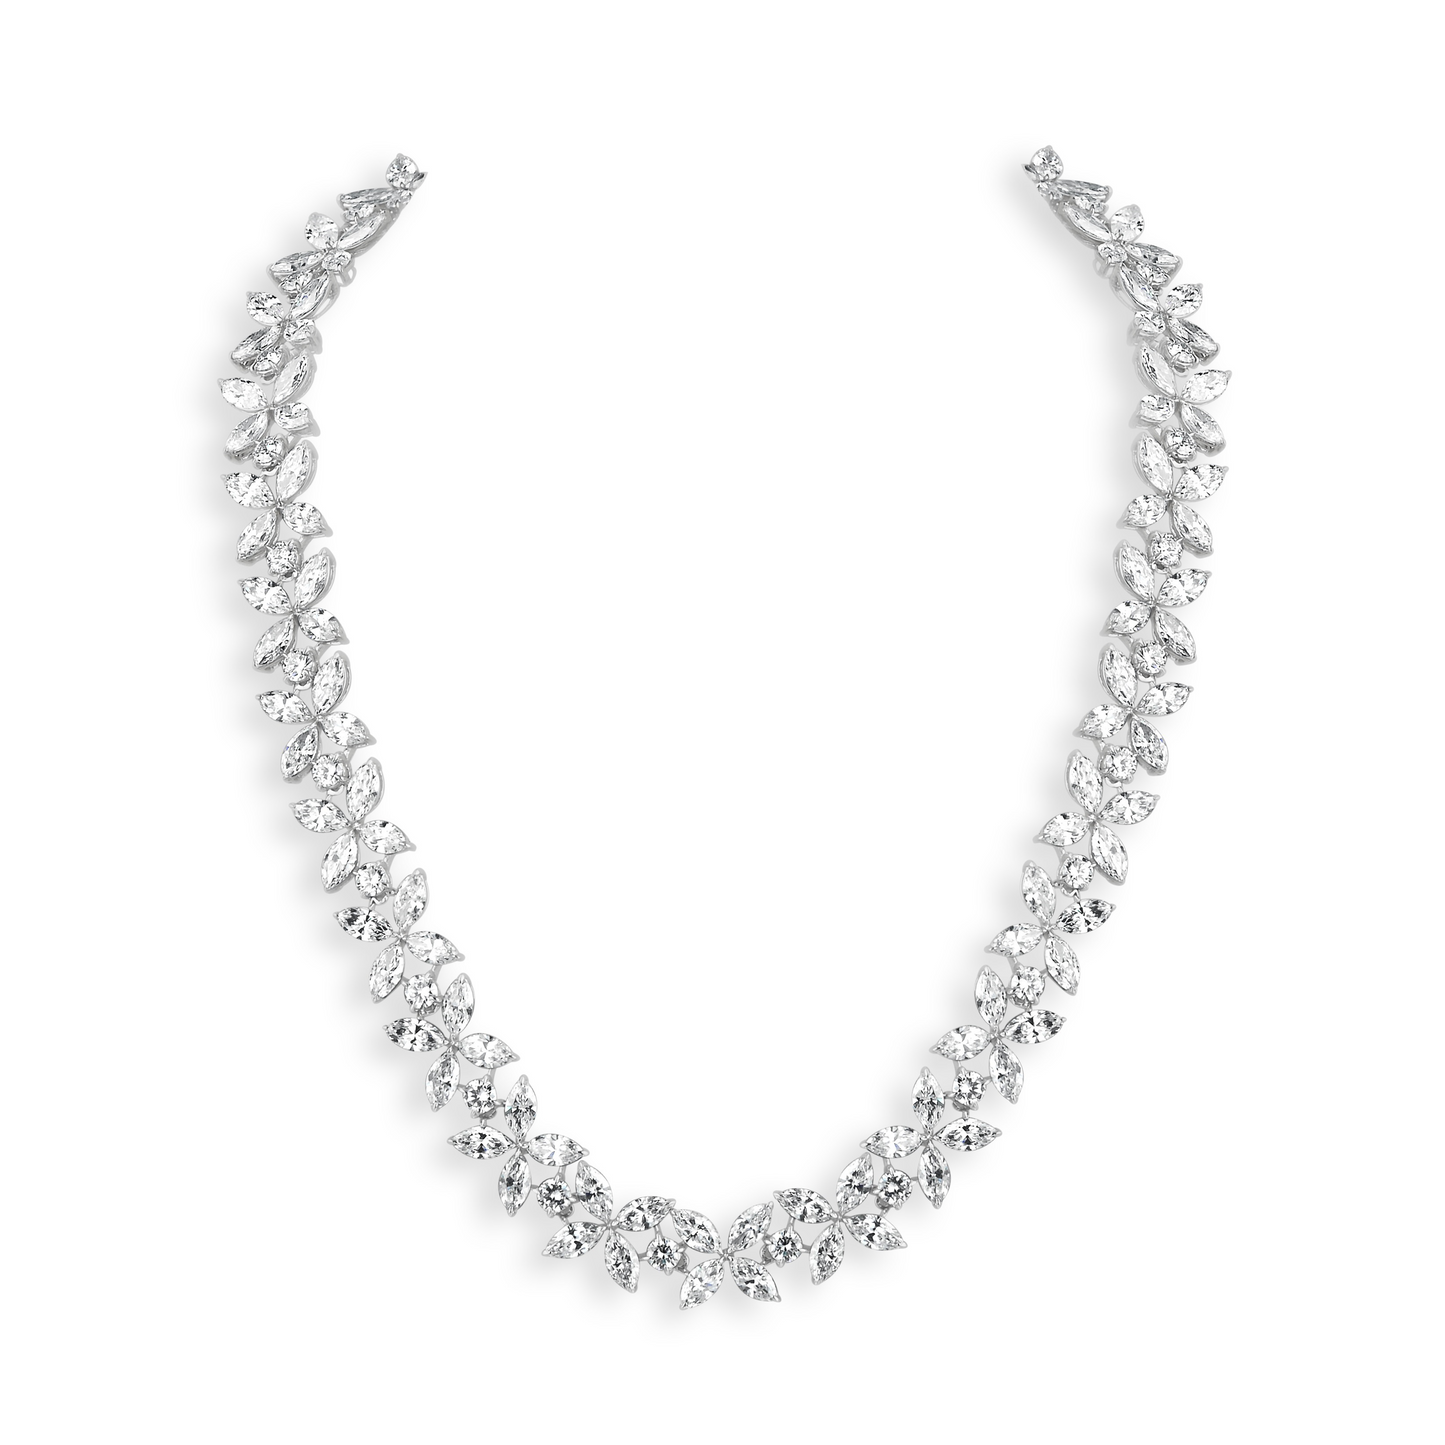 Harmony in Sparkle: Mesmerizing Diamond Necklace with a Blend of Round and Marquise Cuts